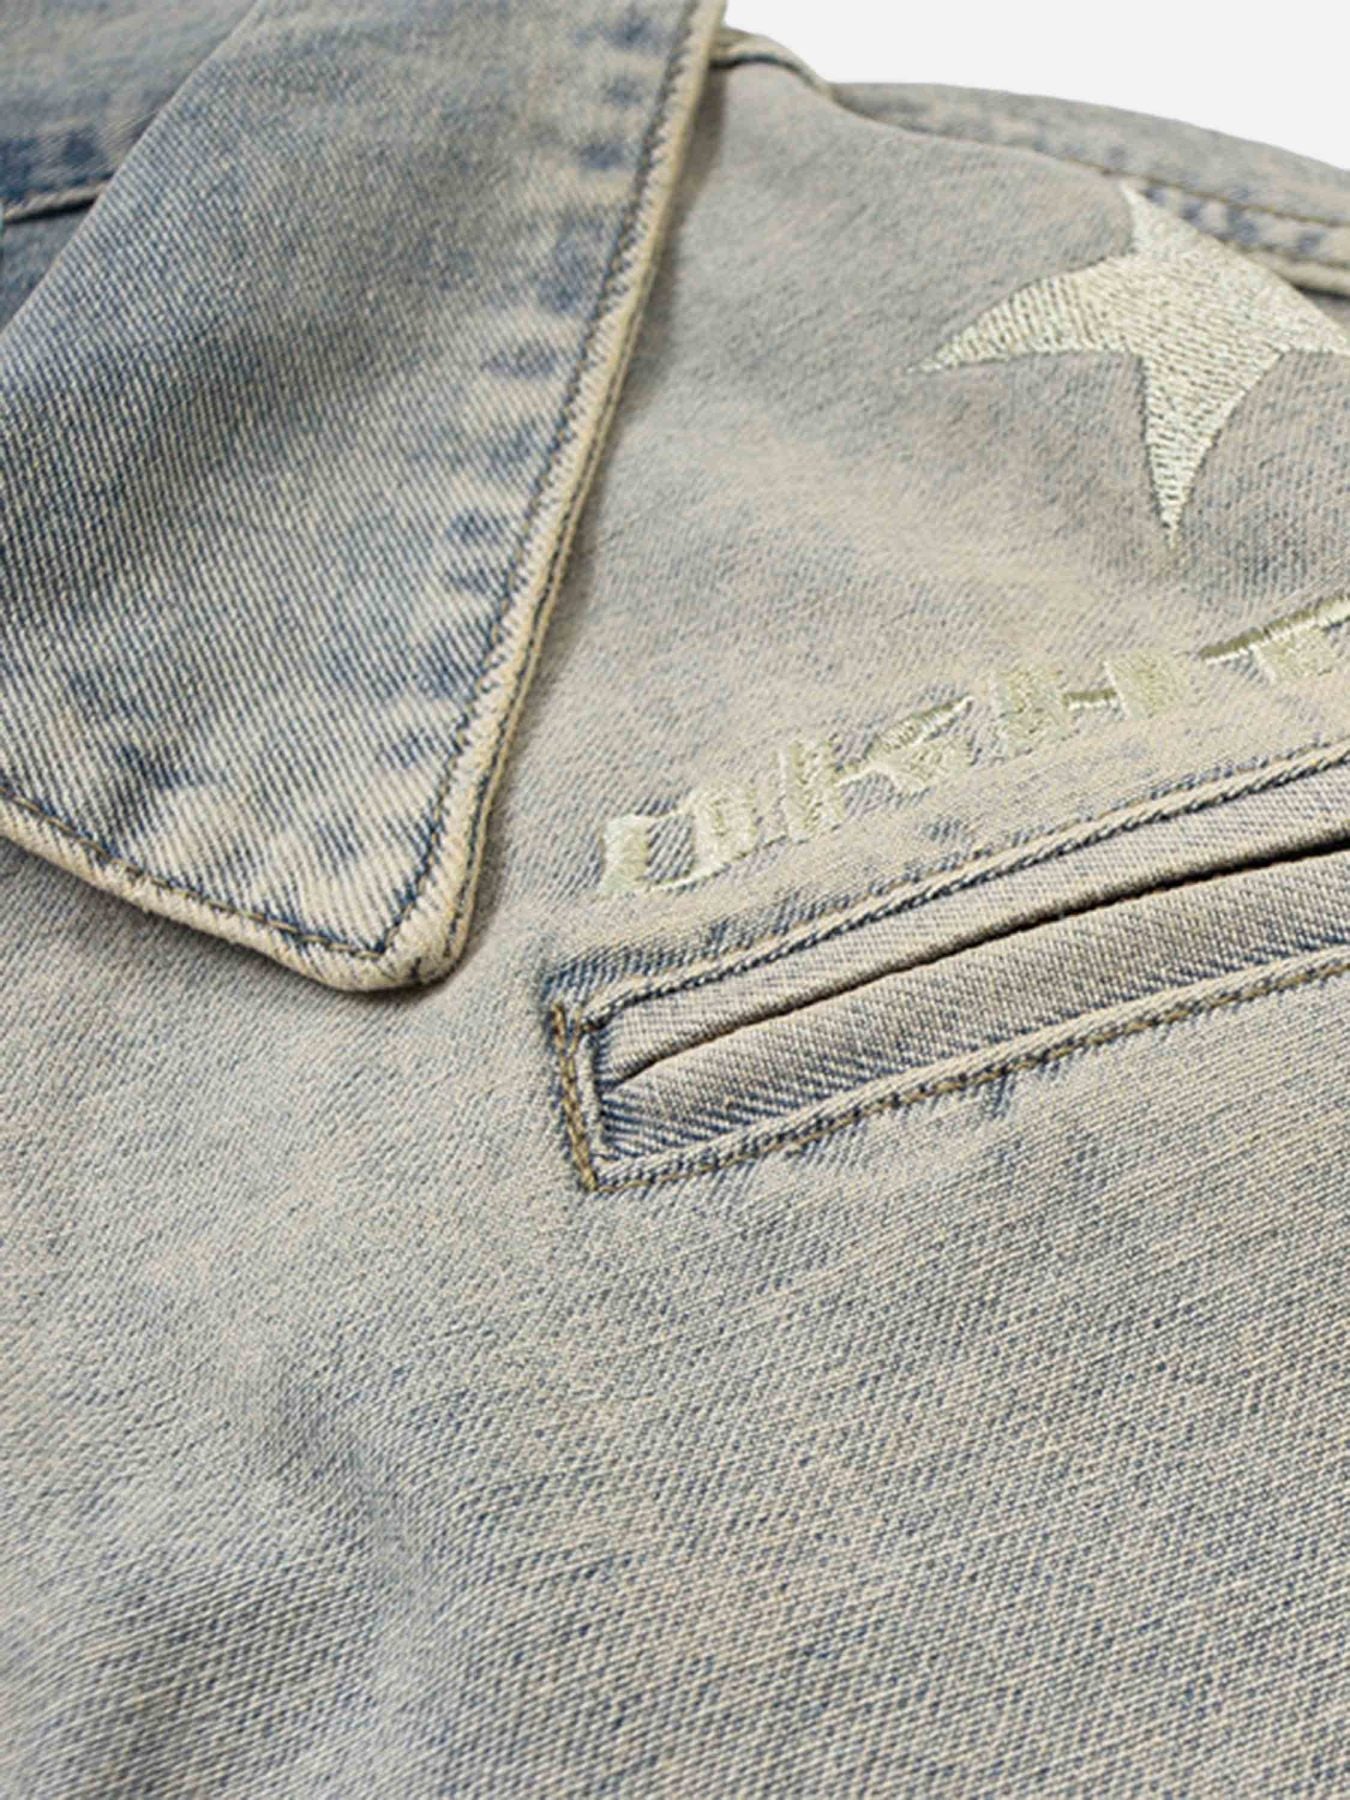 The Supermade Five-pointed Star Embroidered Zipper Jacket